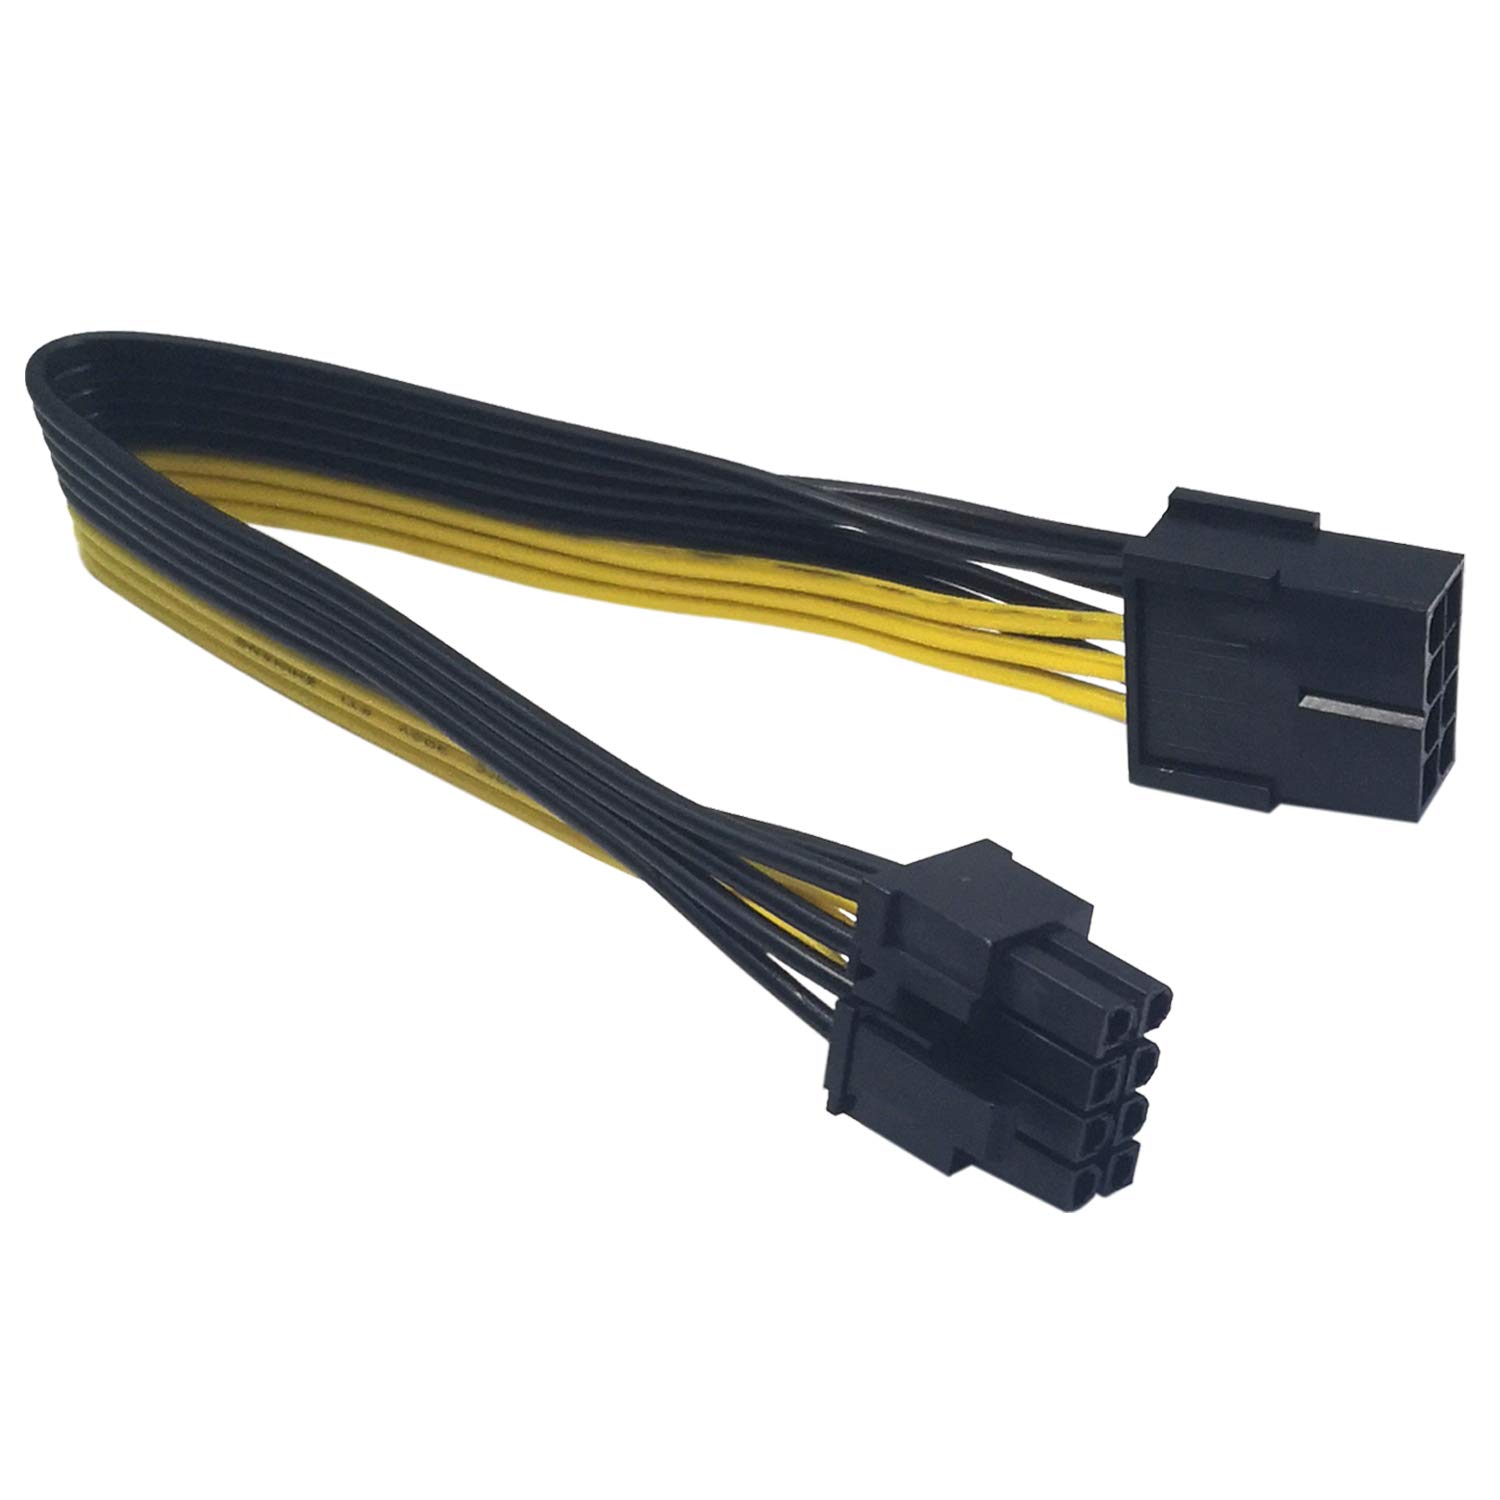 Connect the pcie power cable. 10 Pin to 8 Pin(6+2) 6 Pin PCIE GPU Power Adapter sleeved Cable for dell Precision 5820. Переходник адаптер 6 пин динамик Тойот. Power Cable 8 Pin. SPI 8 Pin Connector male female.